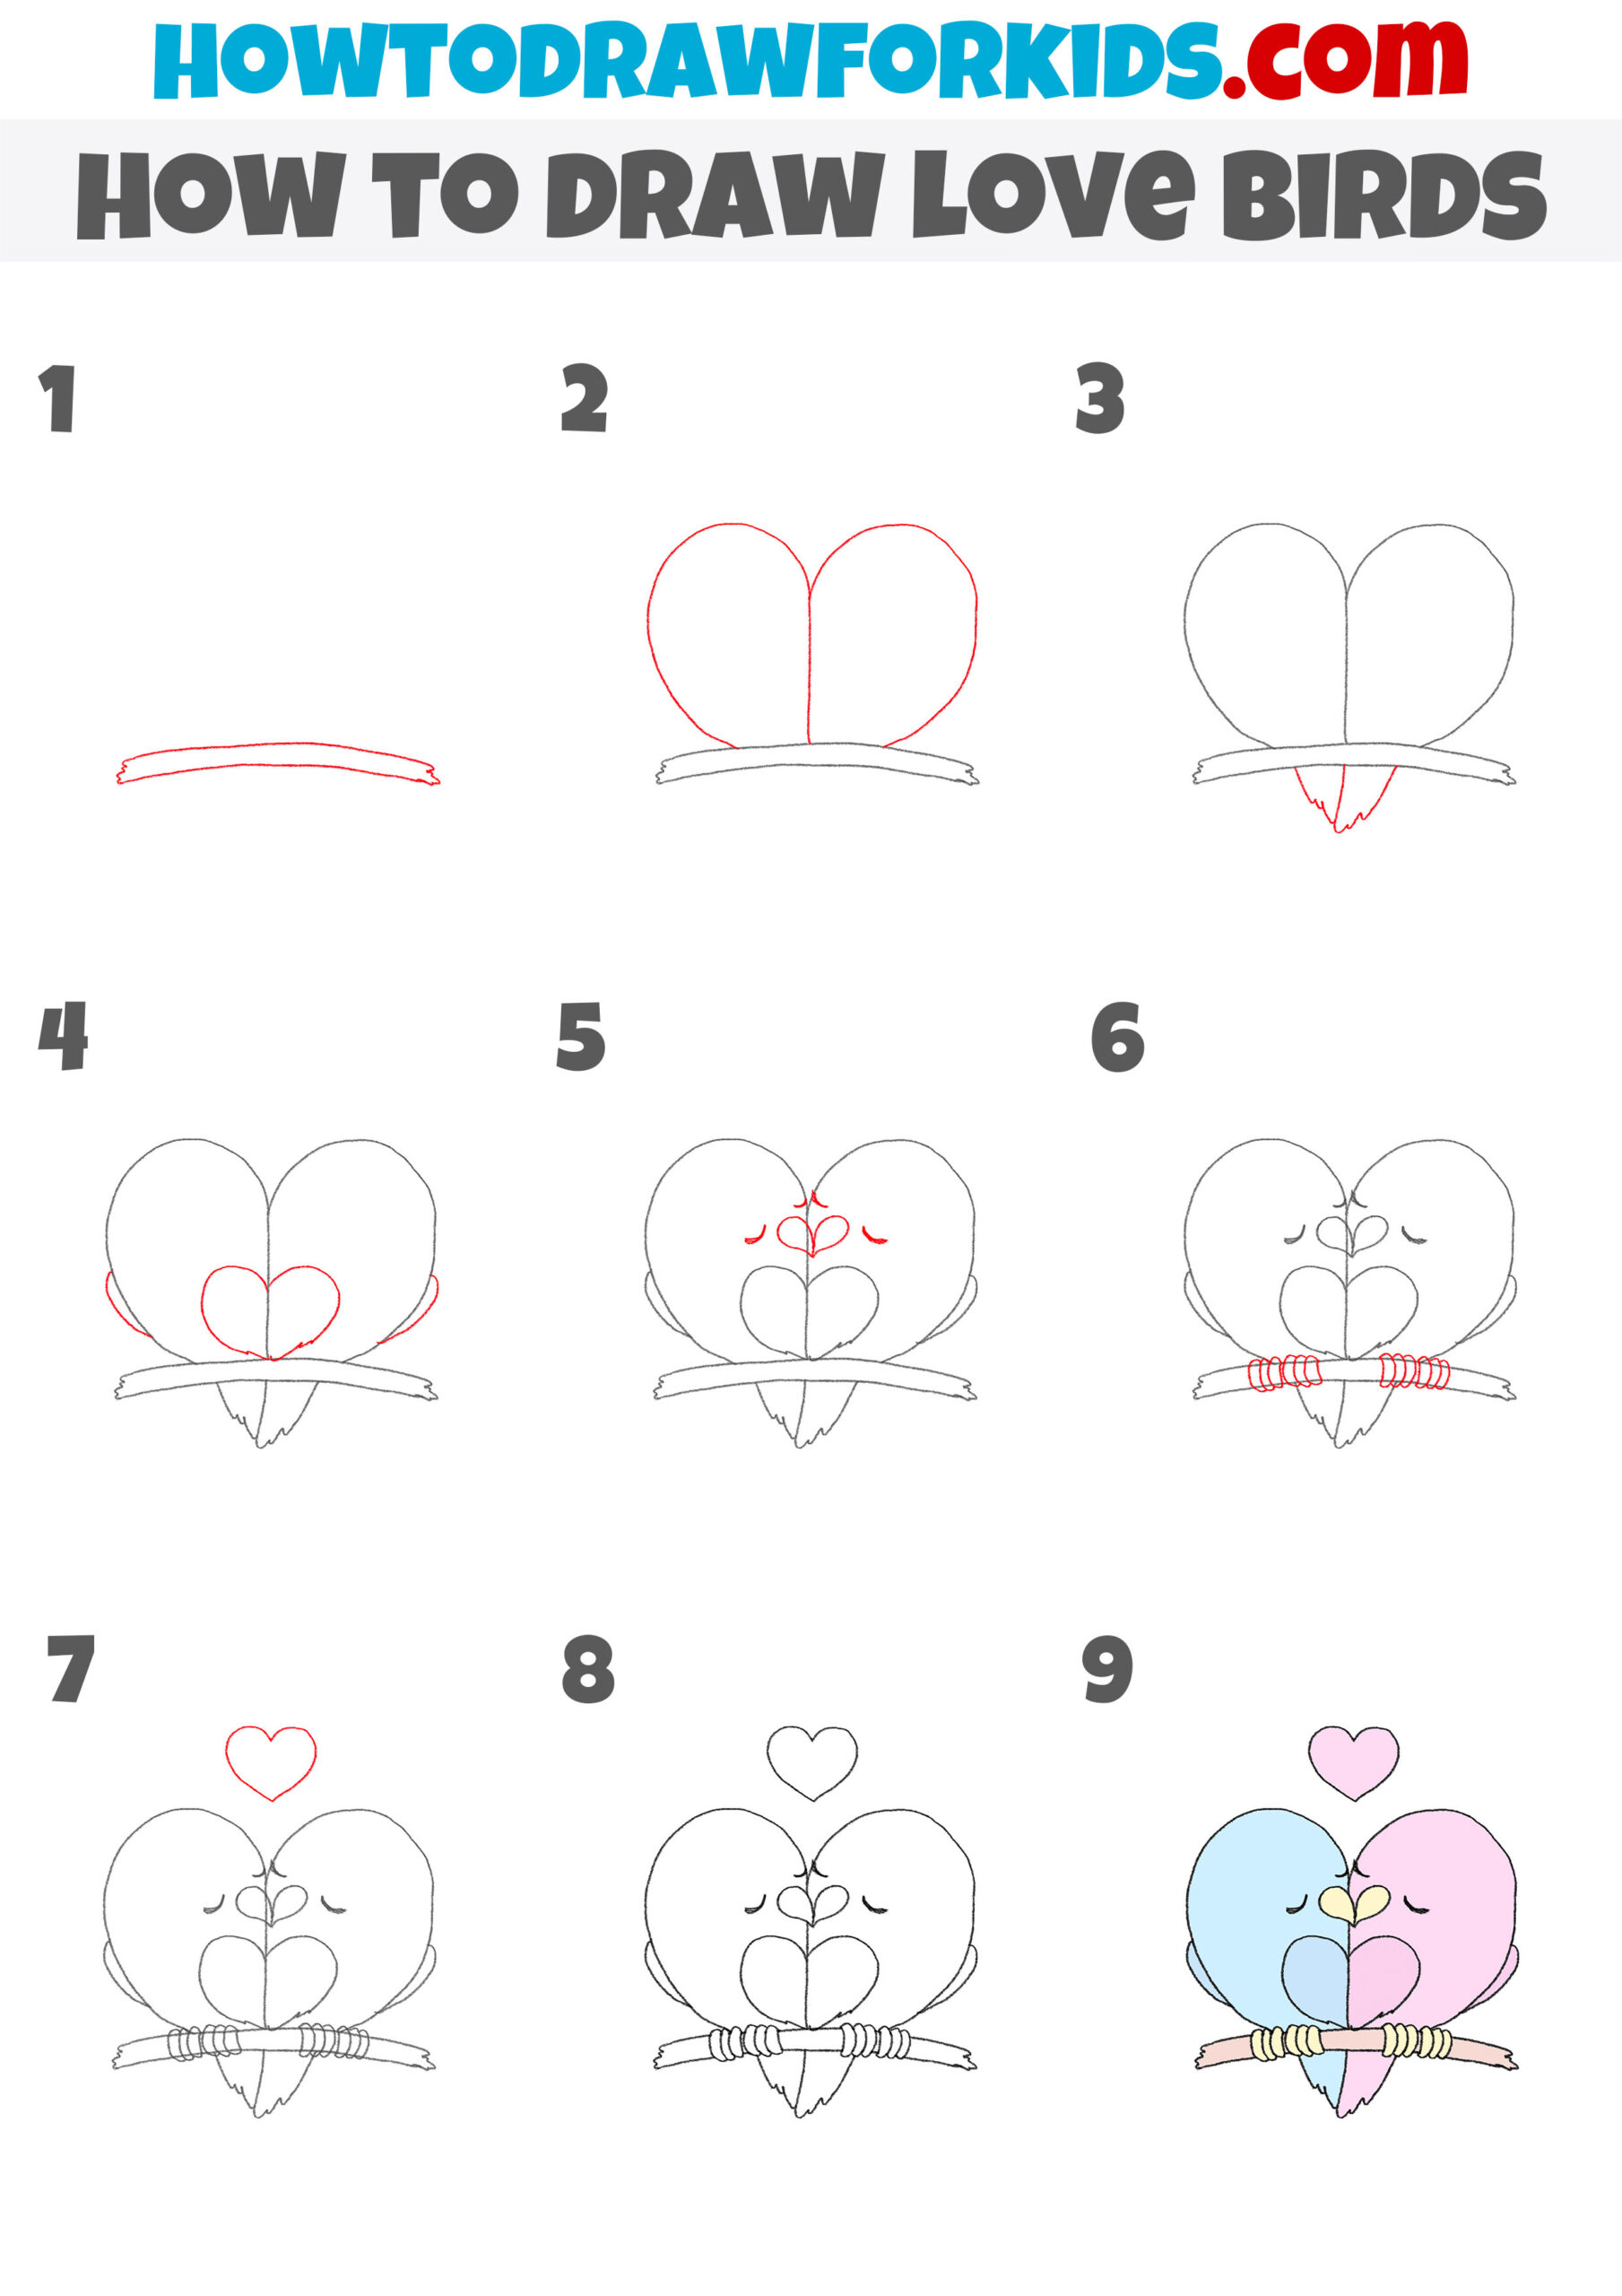 How to Draw Love Birds - Easy Drawing Tutorial